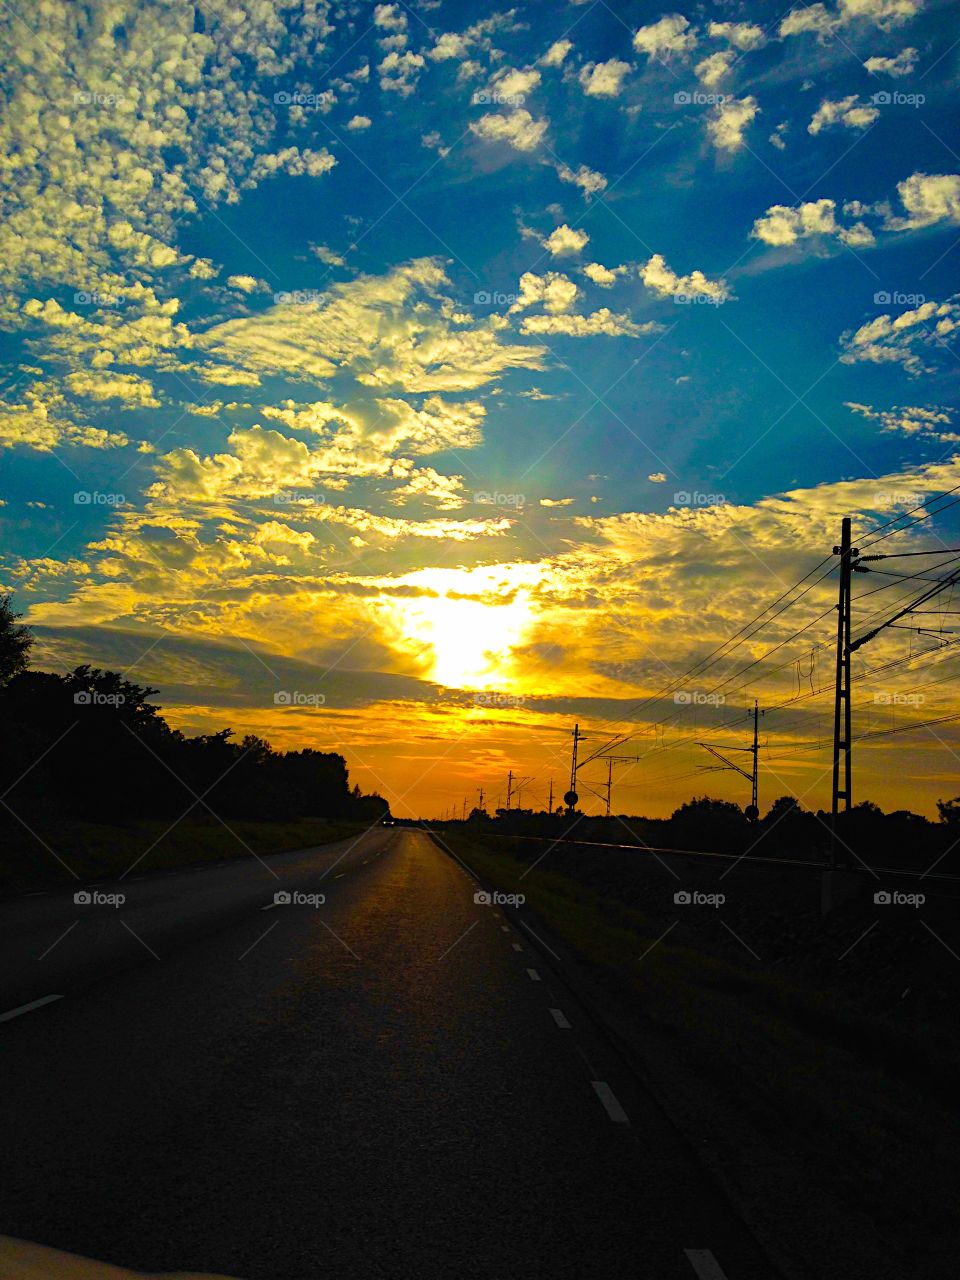 Sunset on the road!